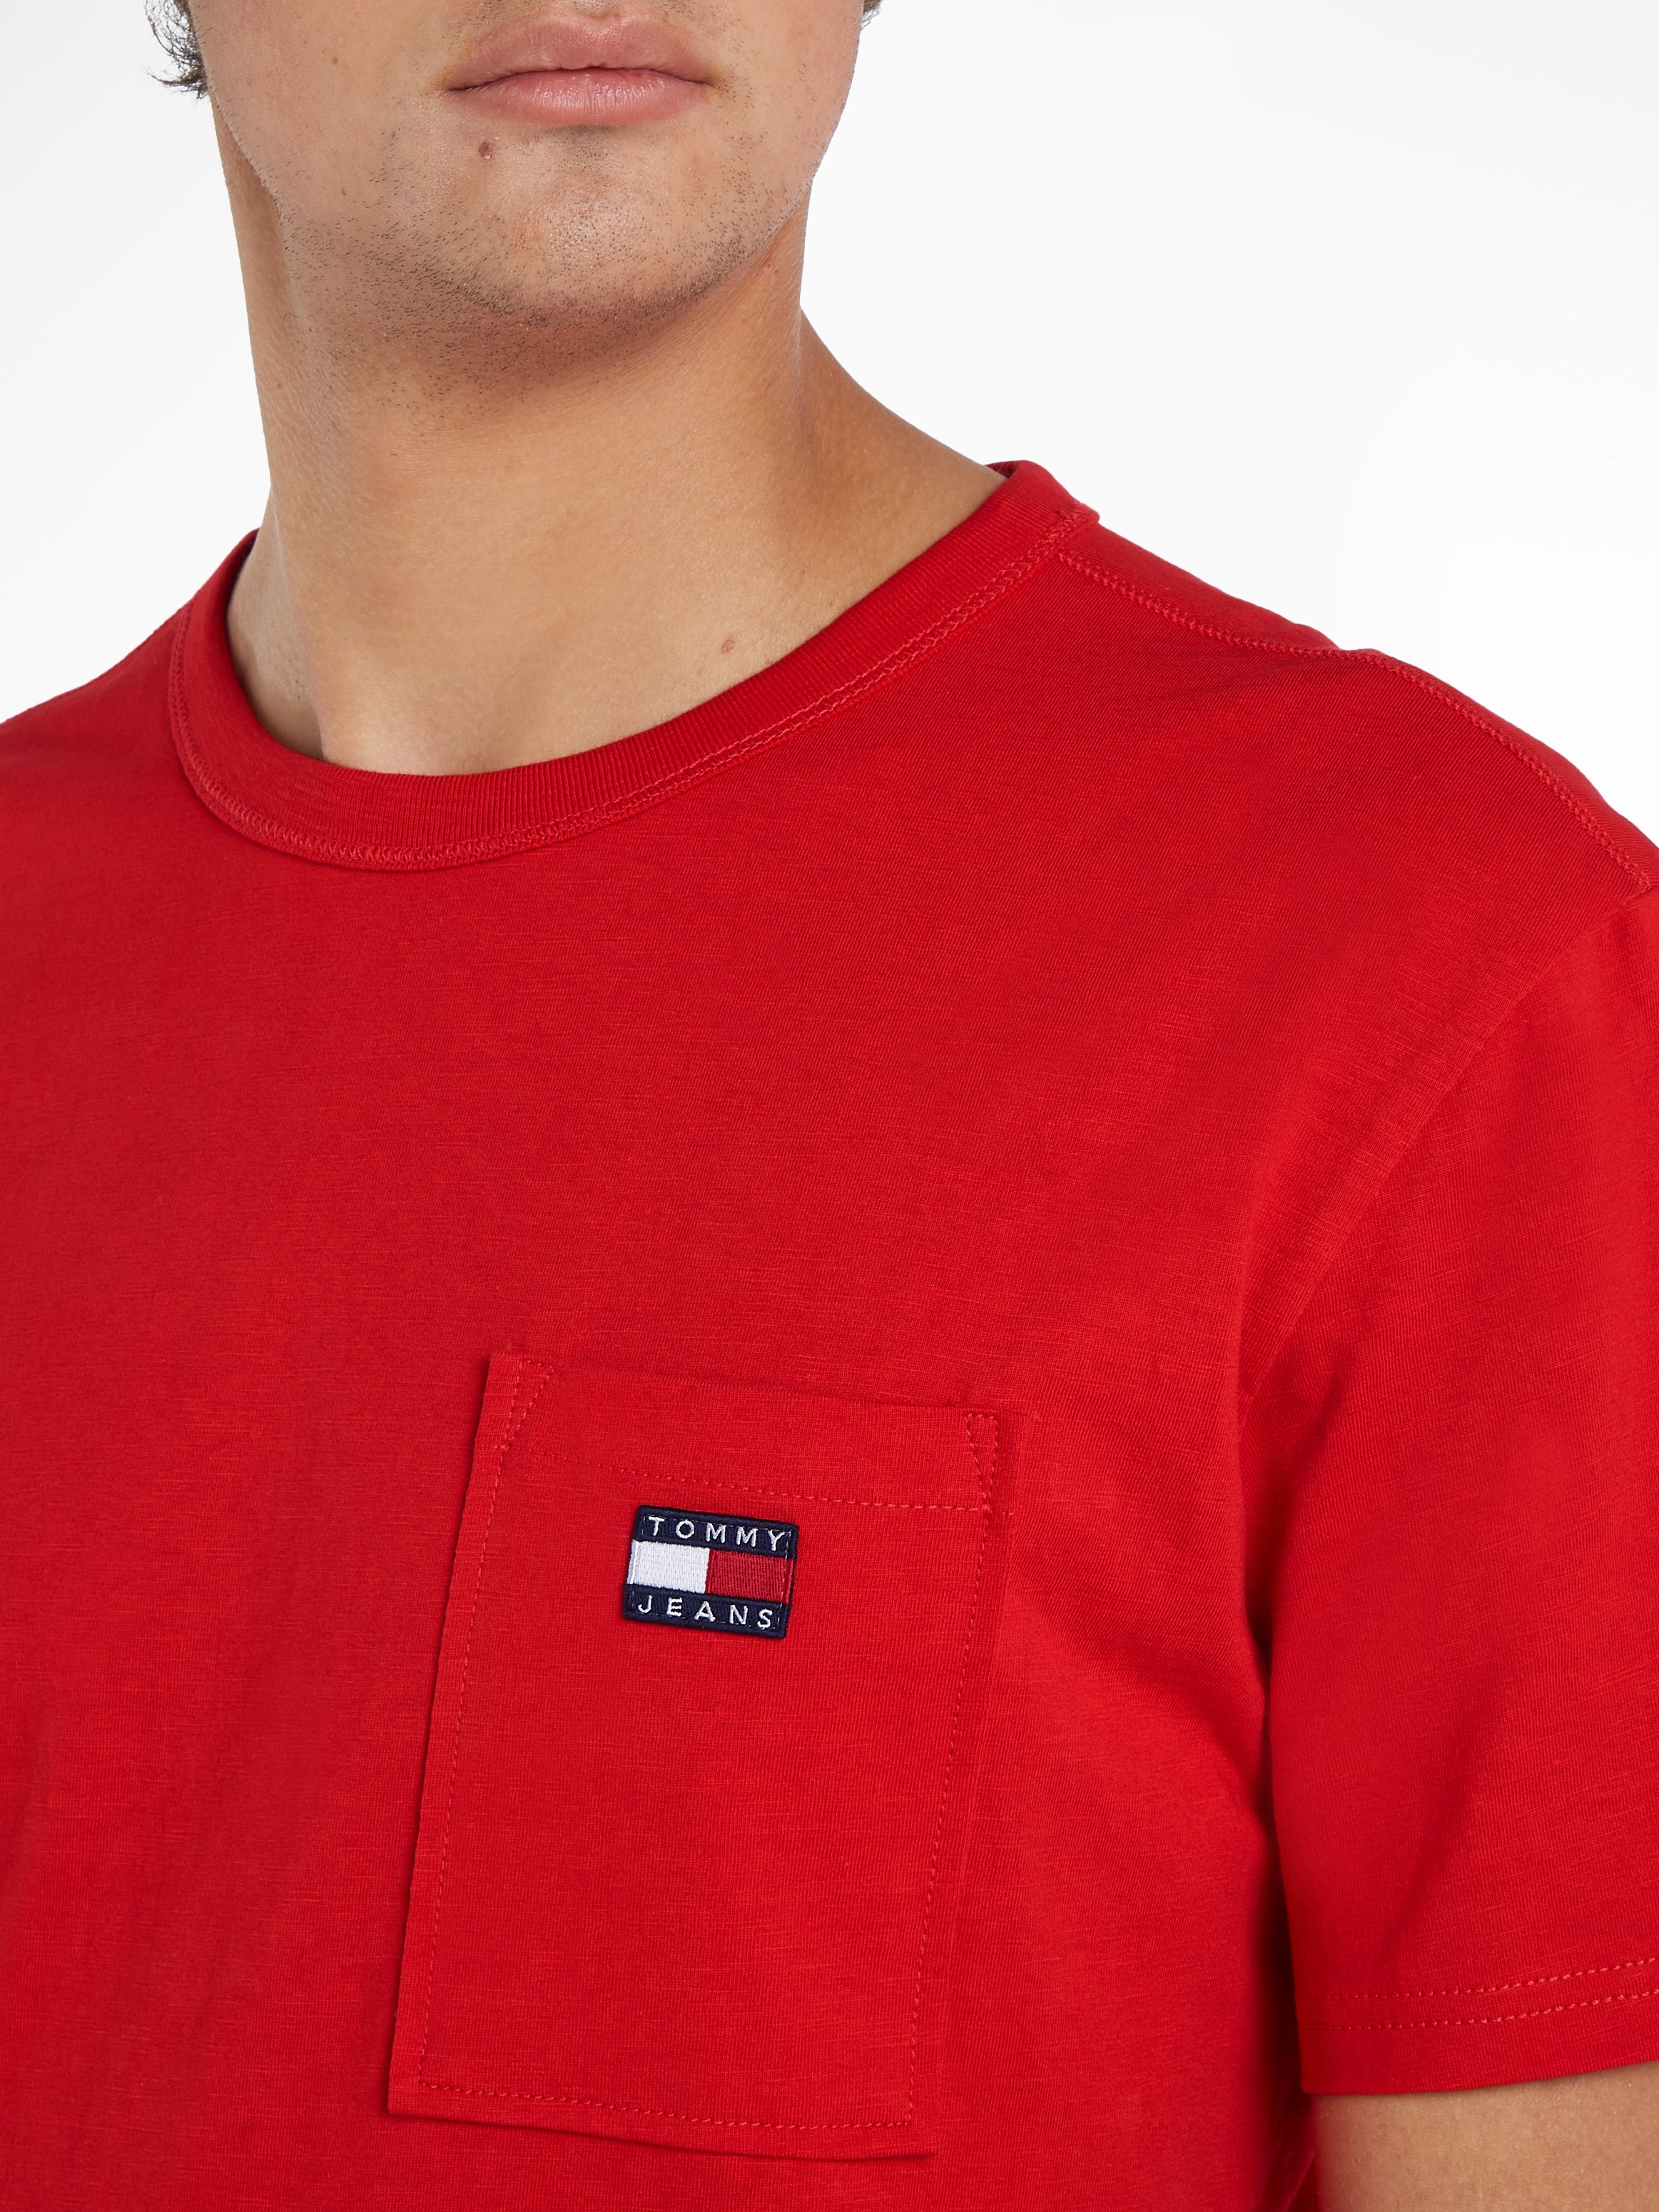 Tommy Jeans T-Shirt CLSC »TJM bei POCKET TEE« ♕ BADGE